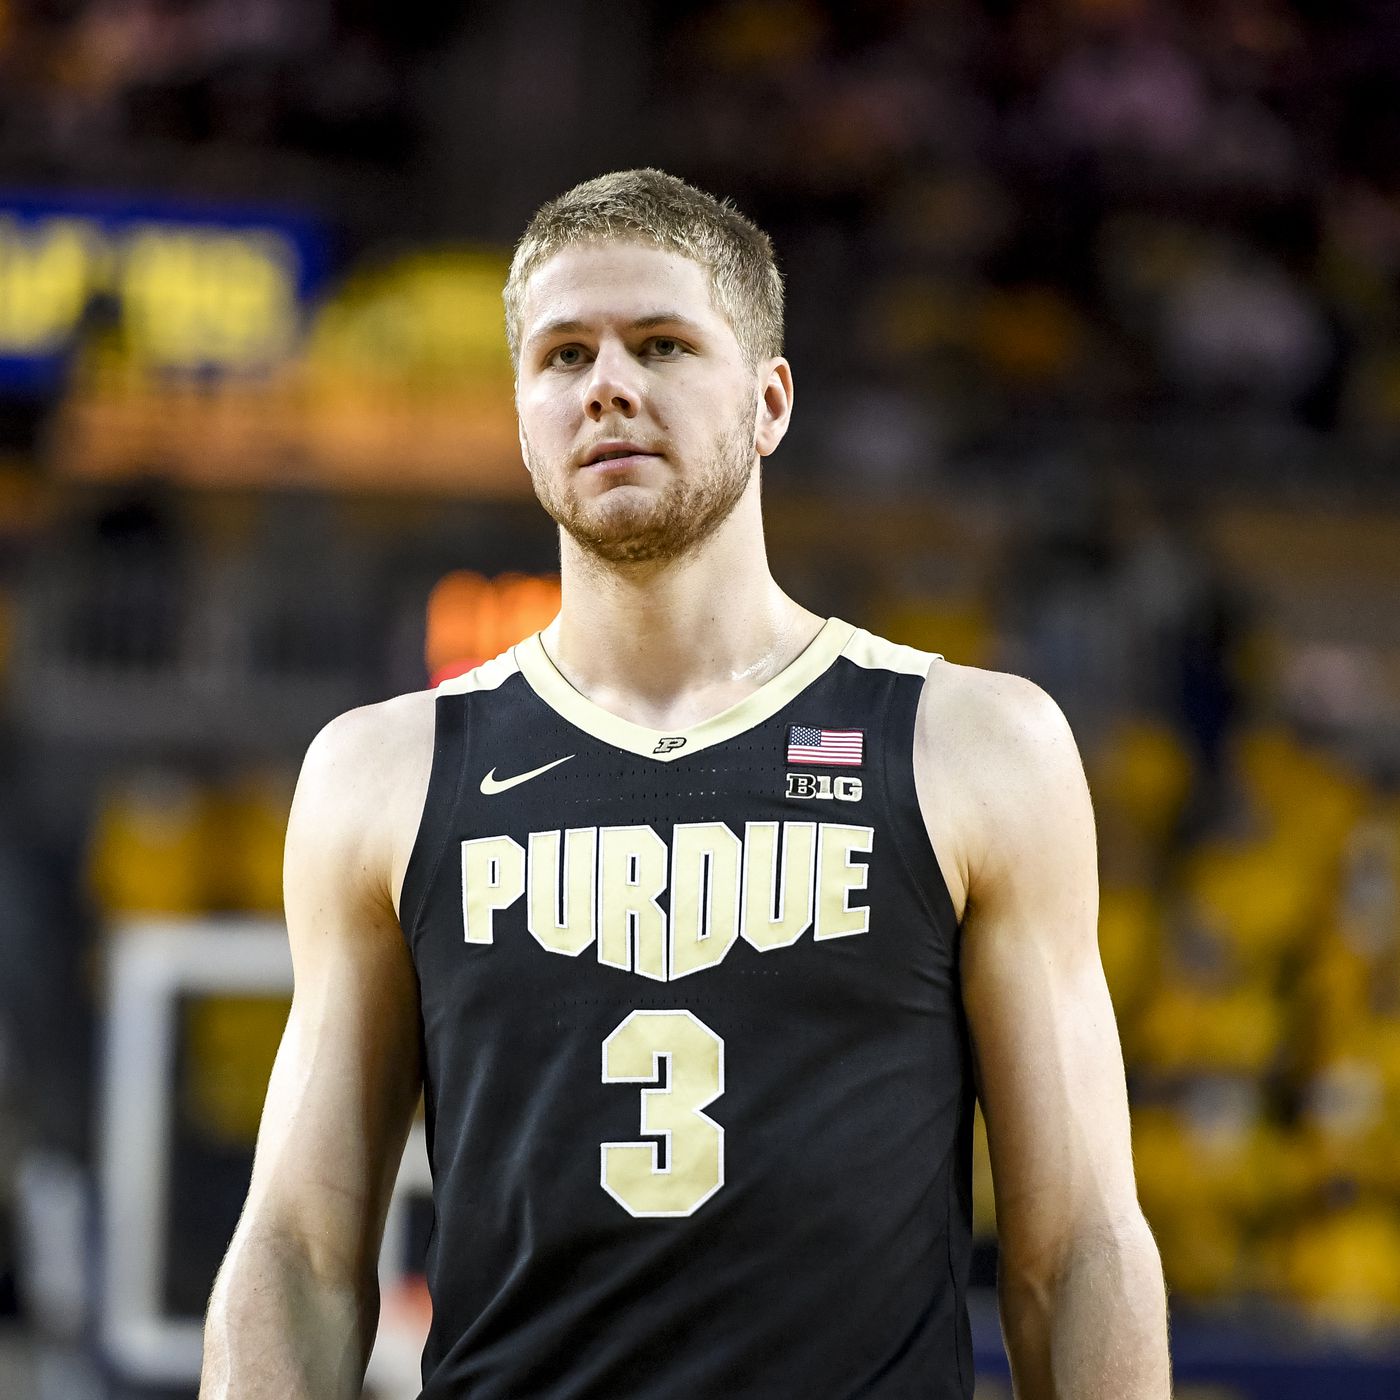 Jersey Number Changes For Purdue Basketball Next Season - Hammer and Rails